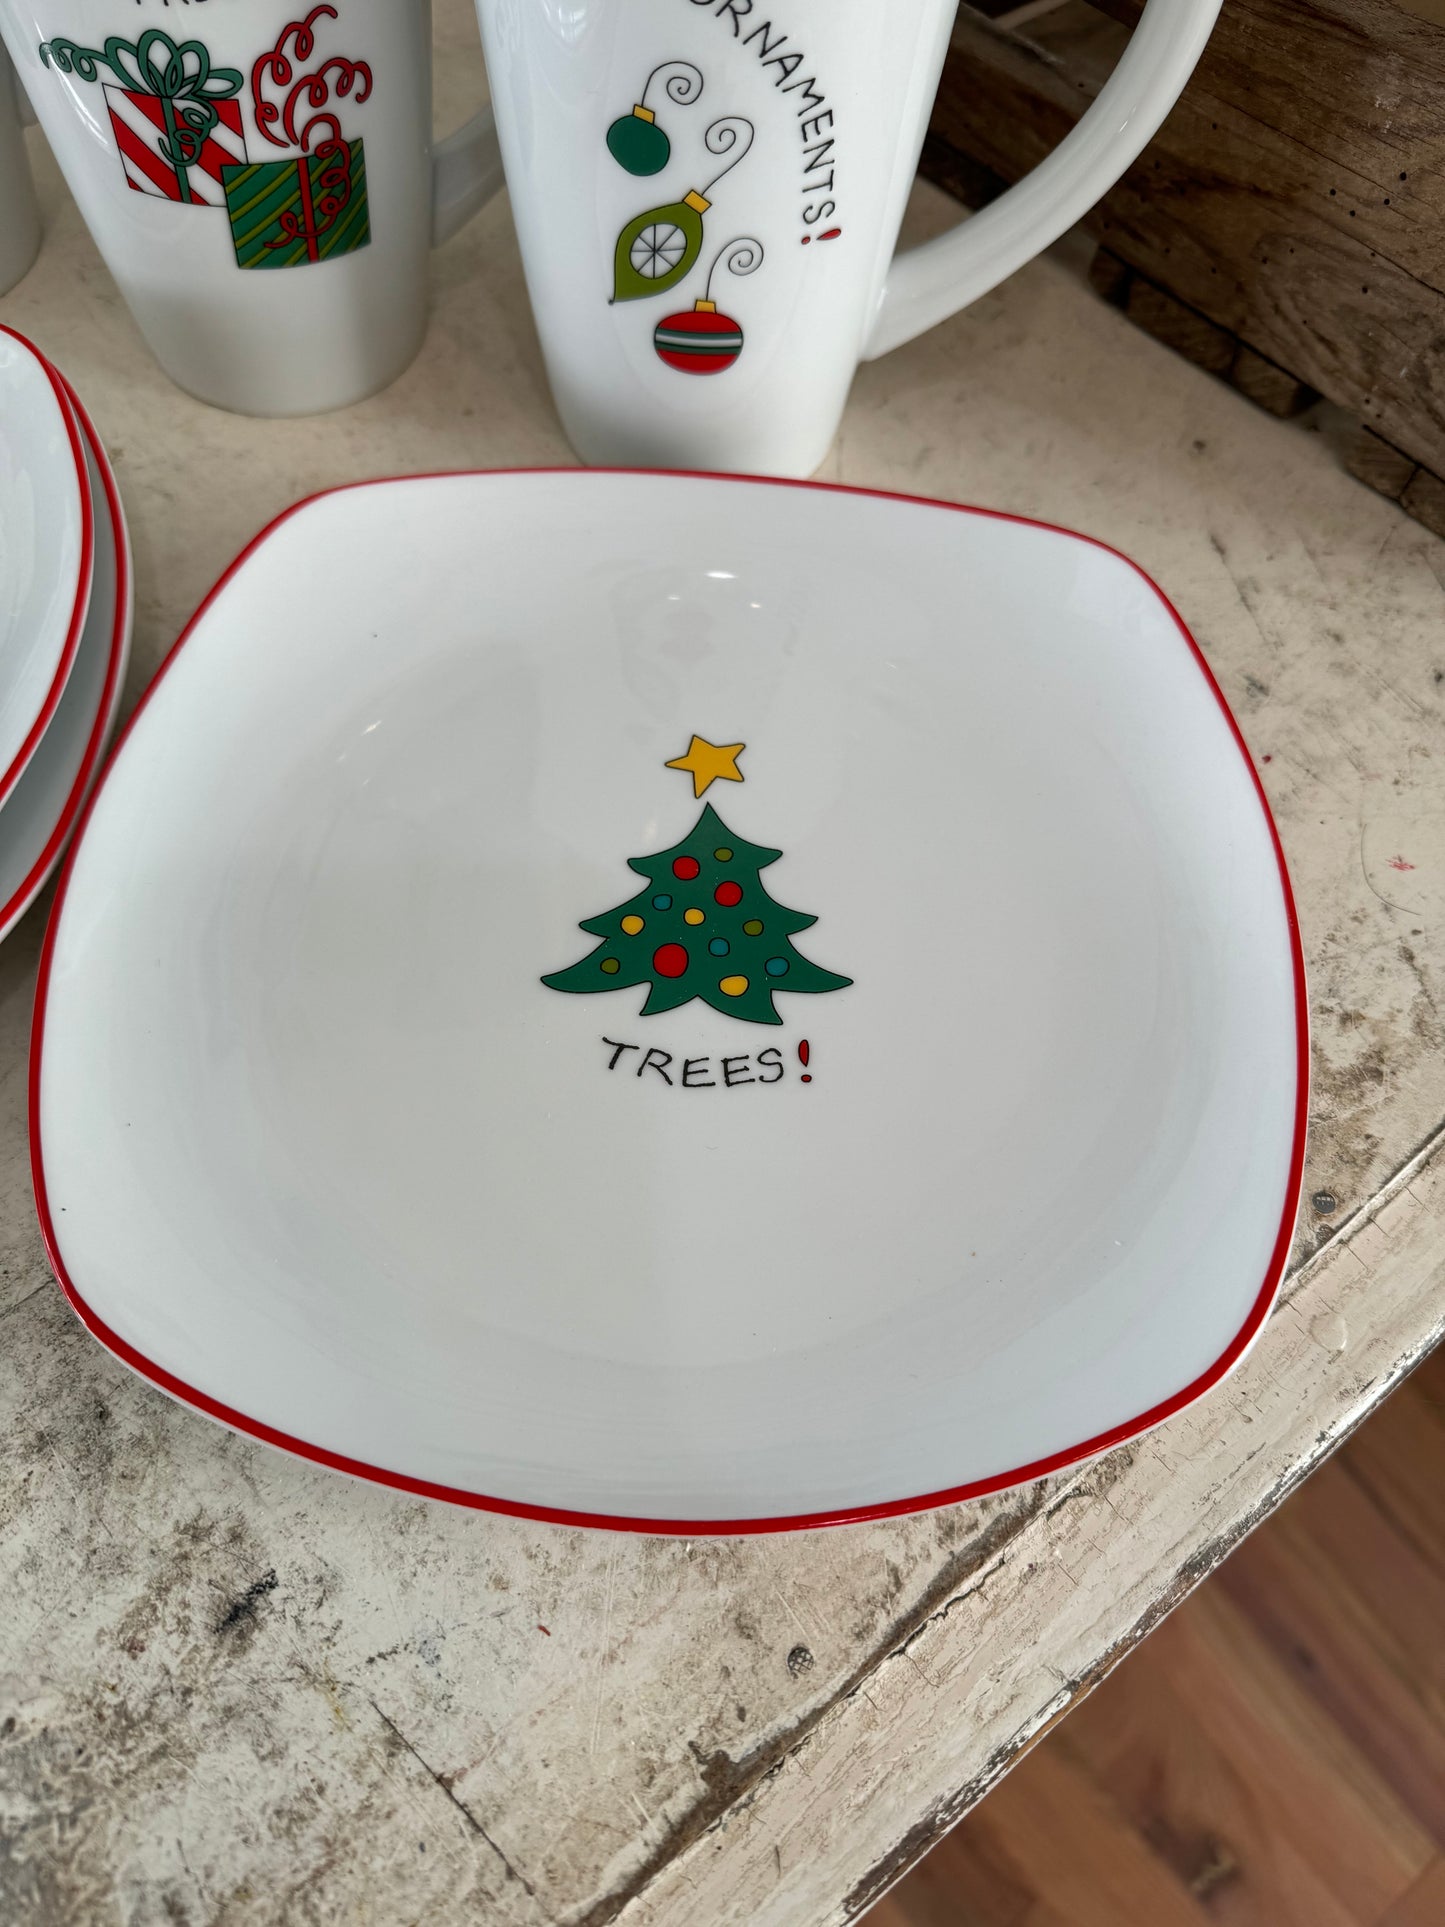 Fitz and Floyd Merry Christmas 8 Piece Gift Set Dessert Plates and Mugs